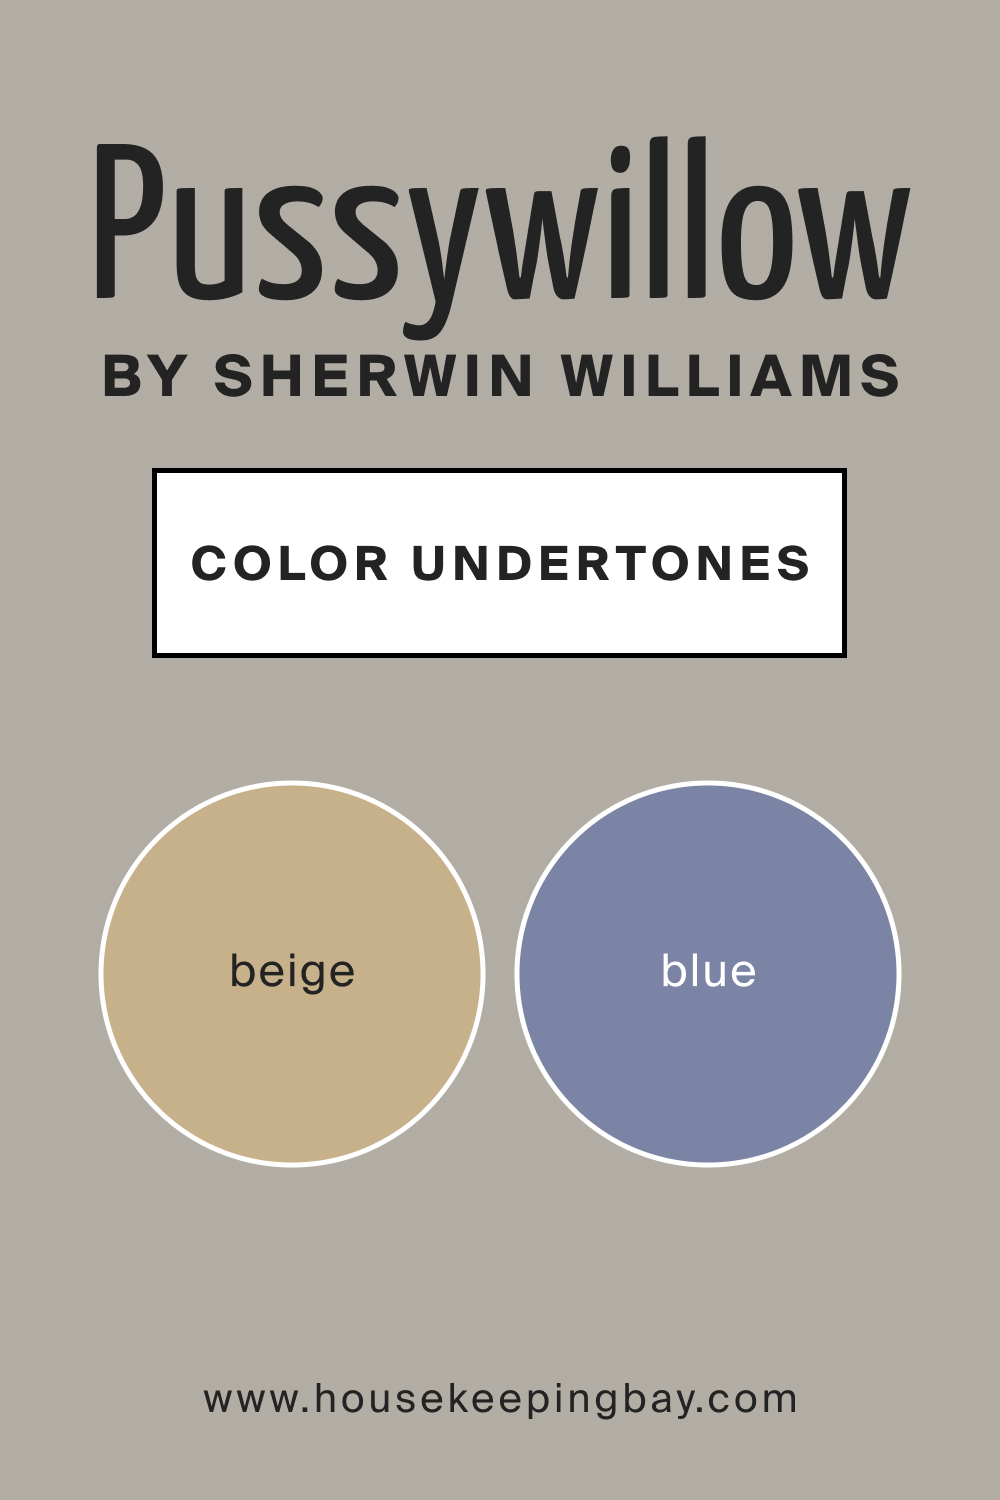 Pussywillow SW 7643 by Sherwin Williams Color Undertones